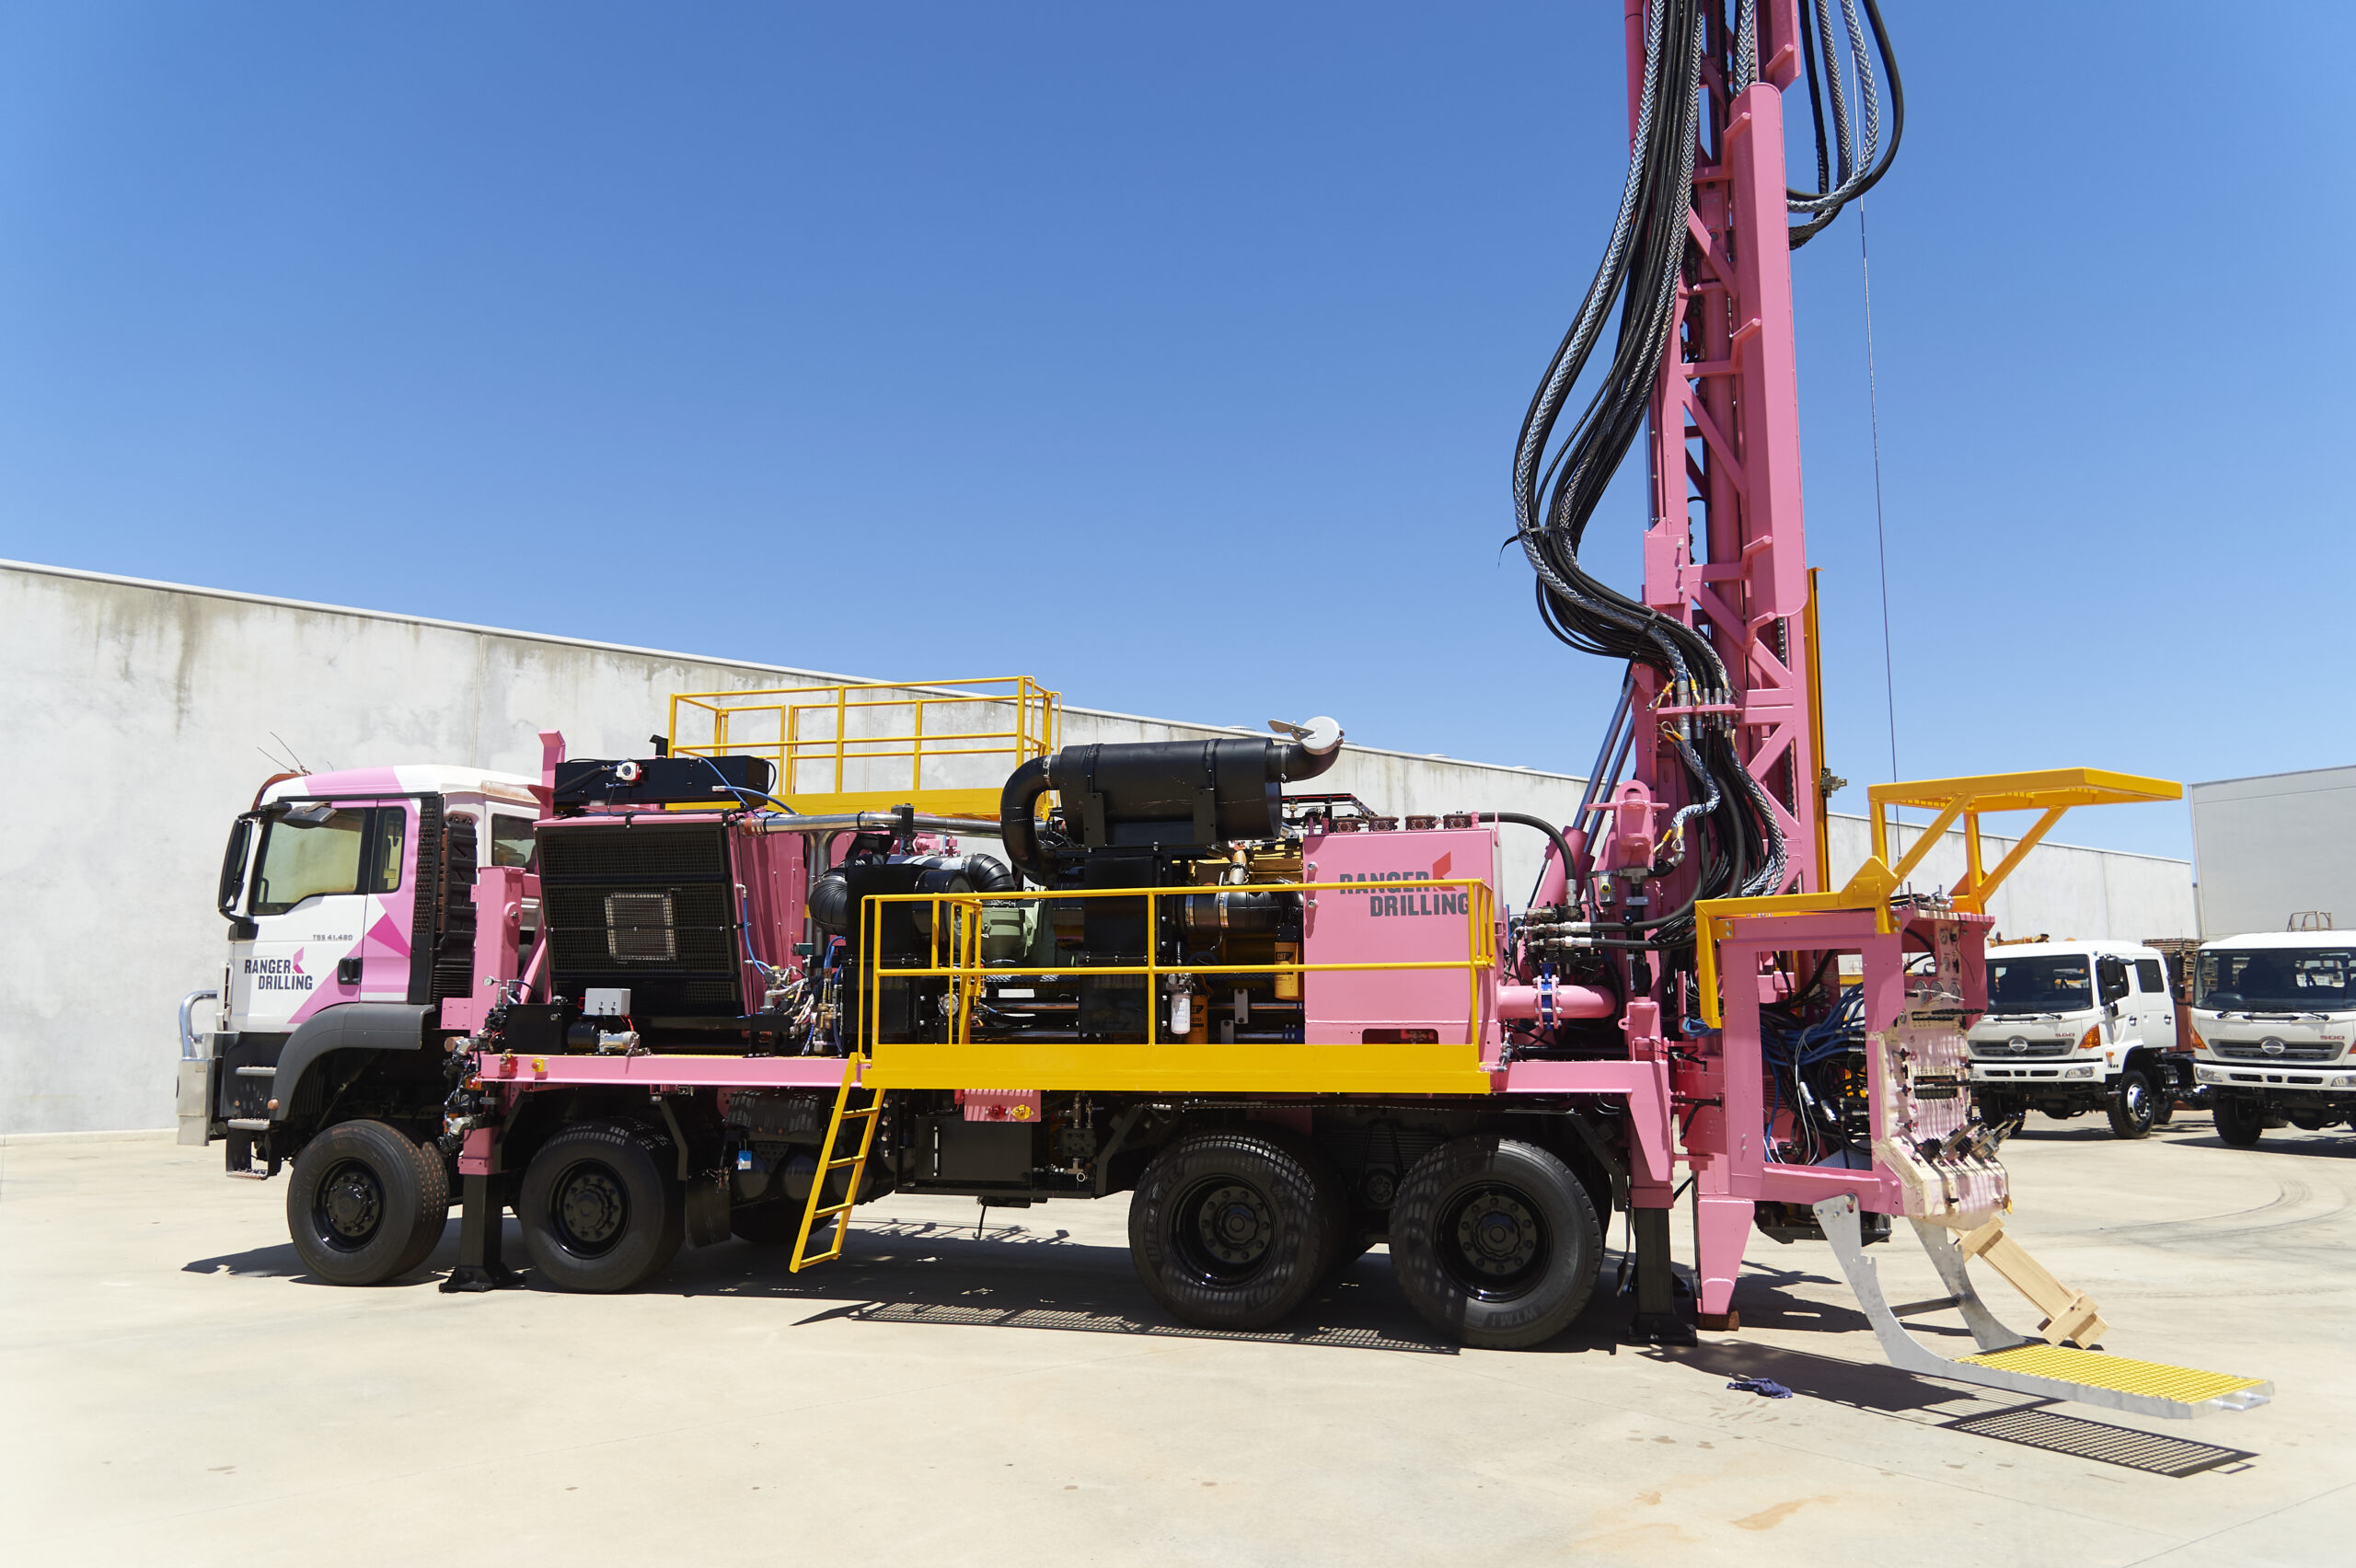 The Ranger Drilling fleet has expanded again as this month we commissioned our new Rig 23 on a well known Pilbara iron ore site. Read on.